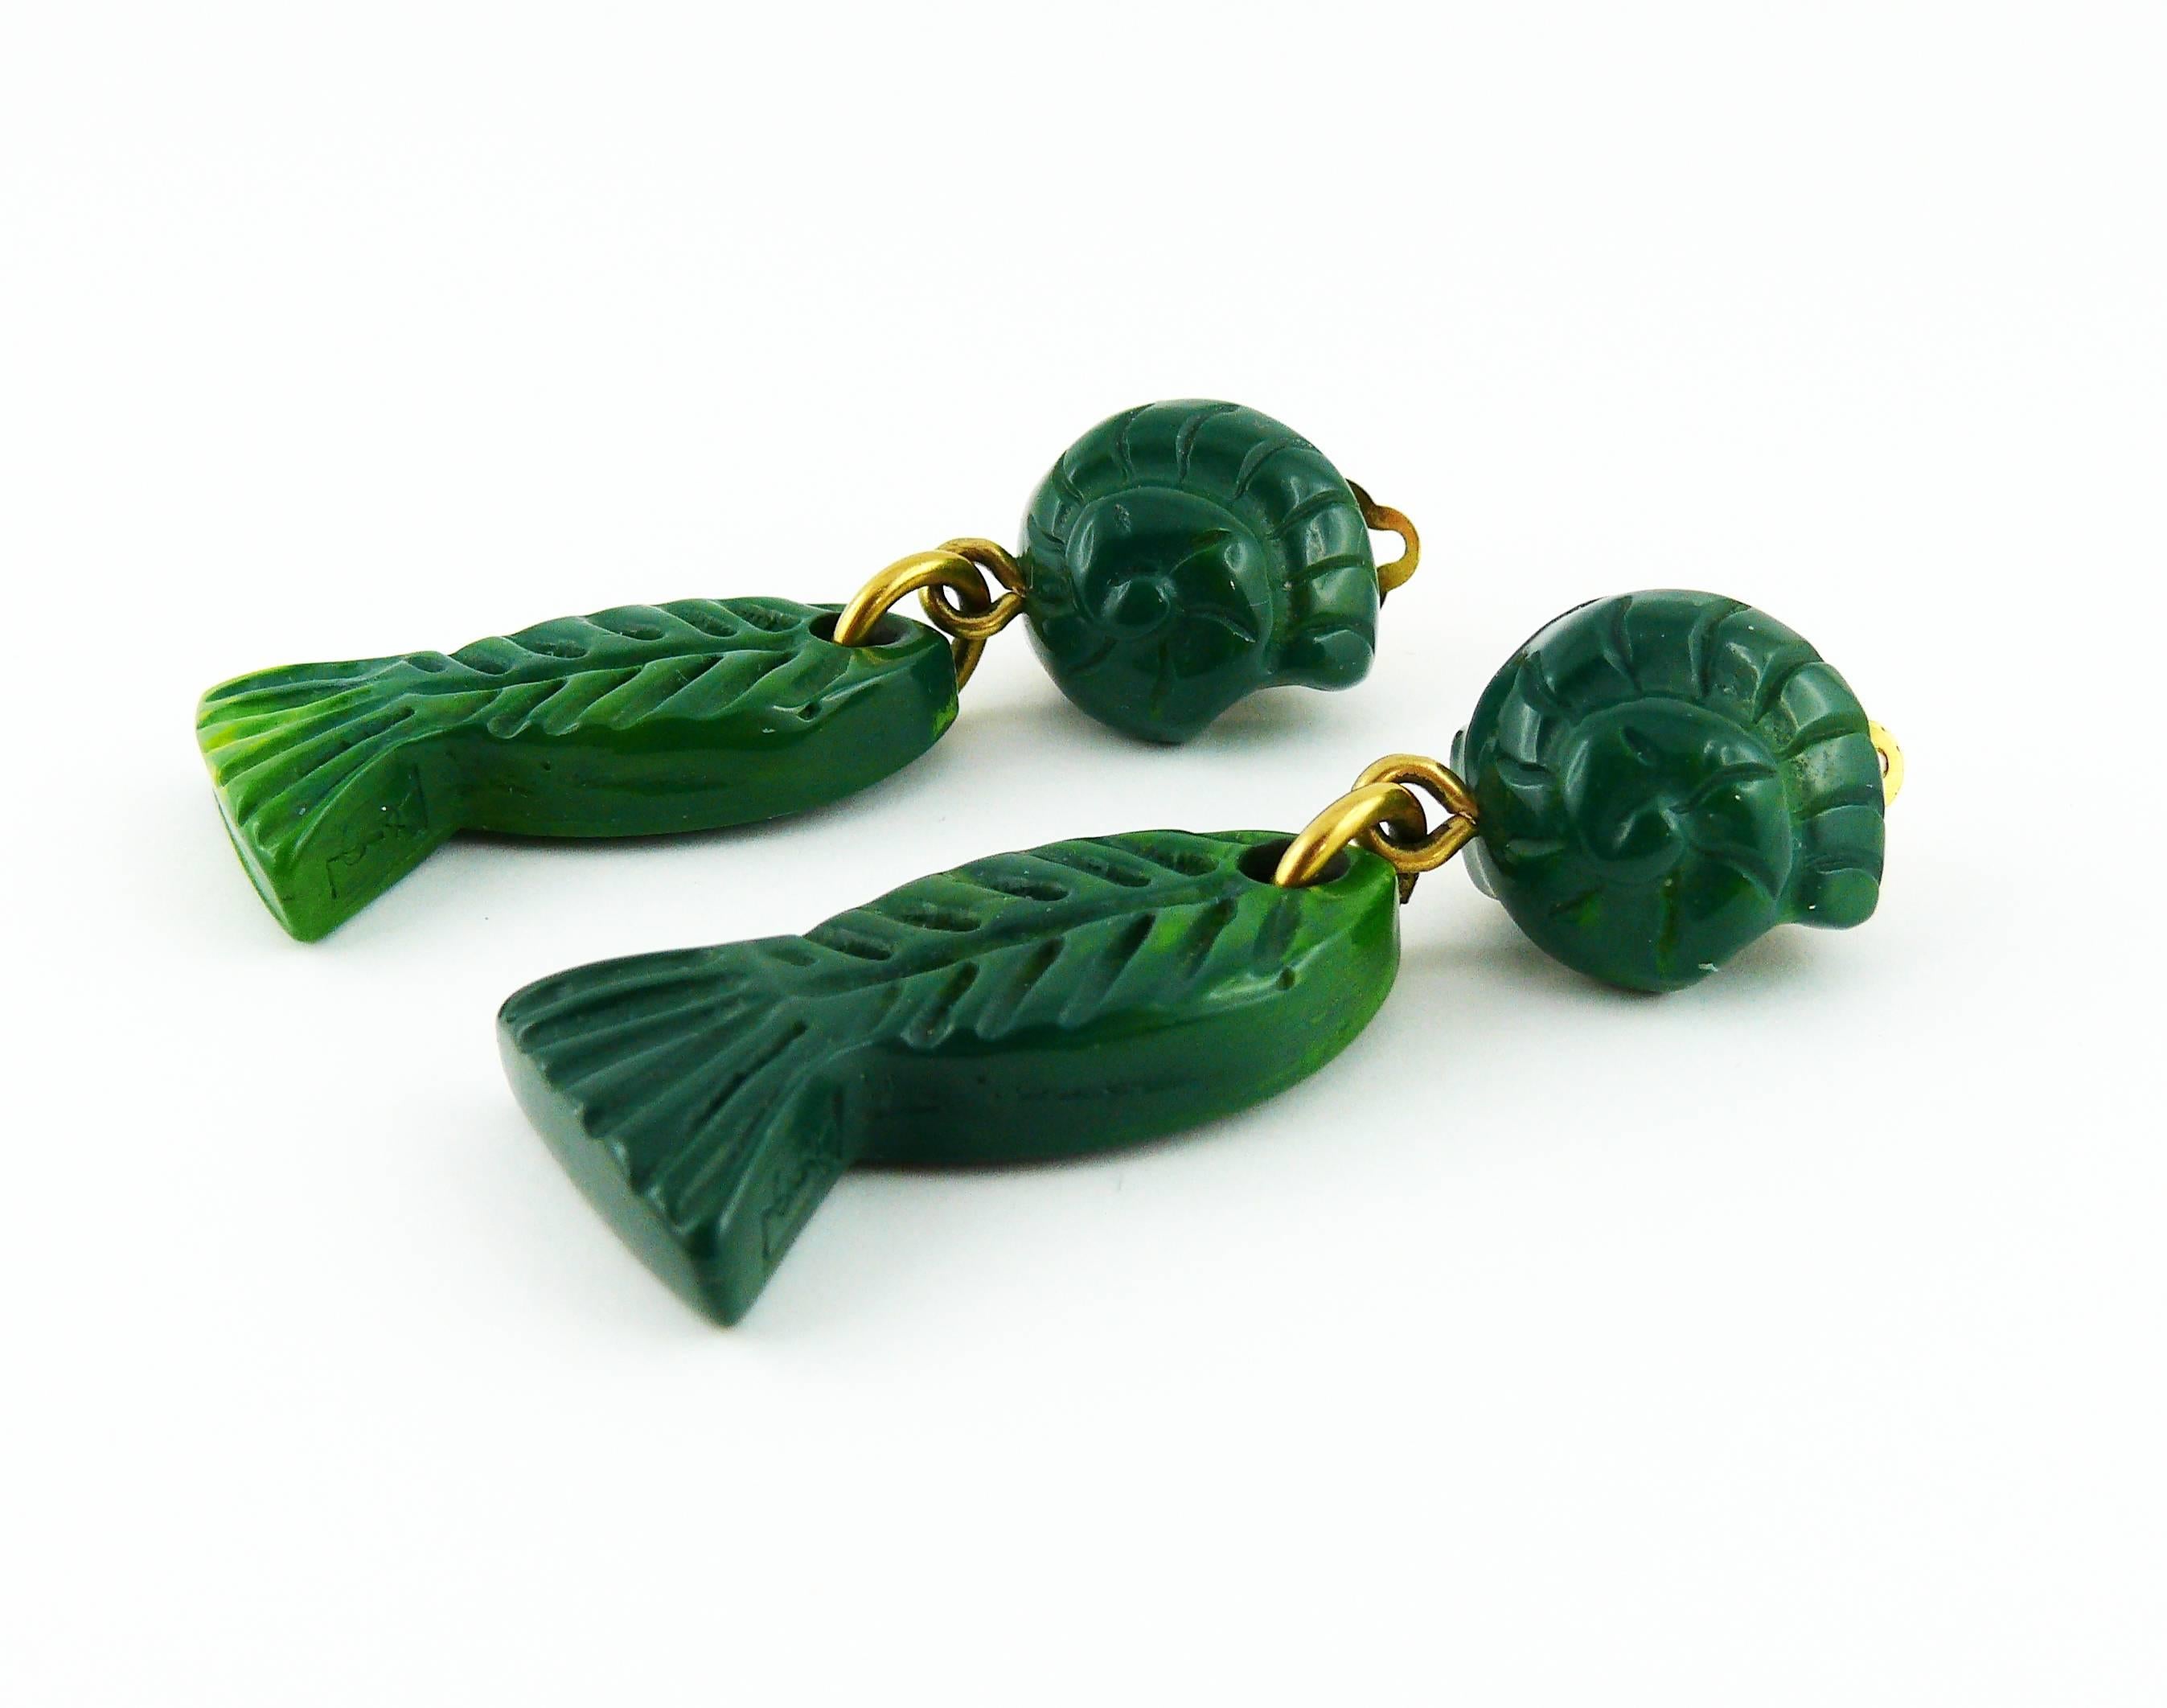 YVES SAINT LAURENT vintage sea life dangling earrings (clip-on) featuring green carved resin fish and shell.

Embossed YSL.

JEWELRY CONDITION CHART
- New or never worn : item is in pristine condition with no noticeable imperfections
-